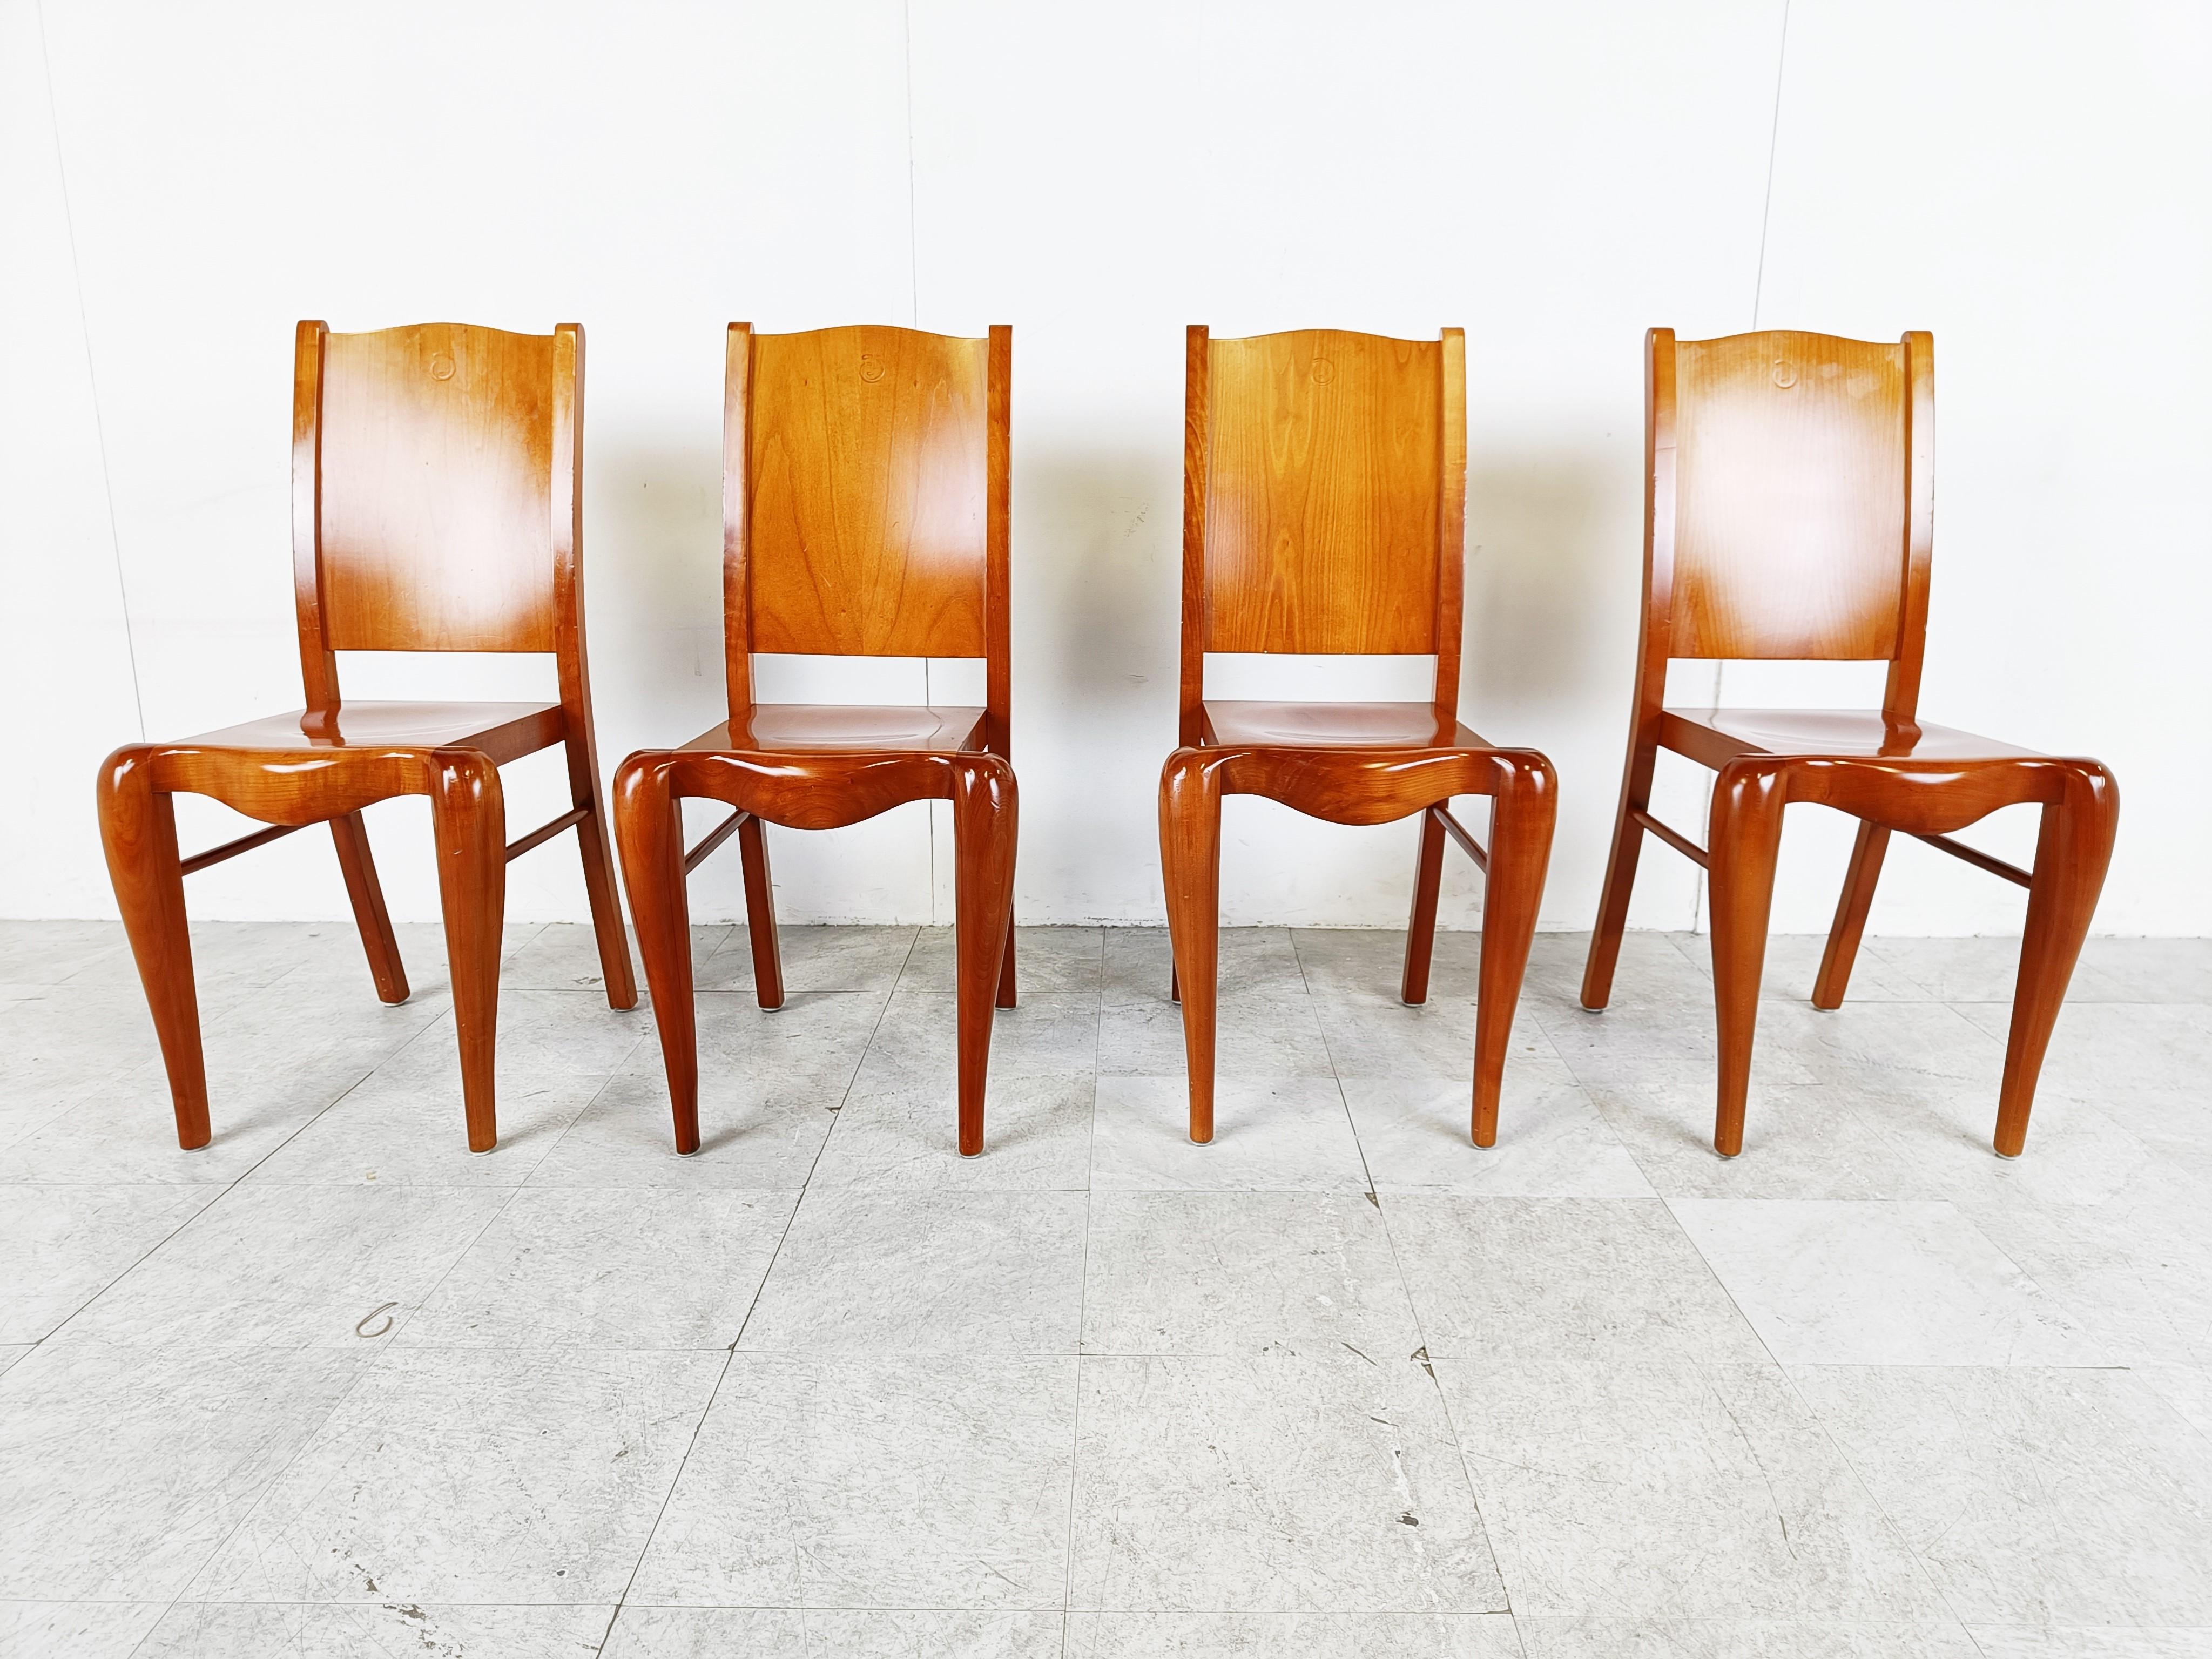 Italian Set of 4 Placide of Wood Dining Chairs by Philippe Starck, 1989